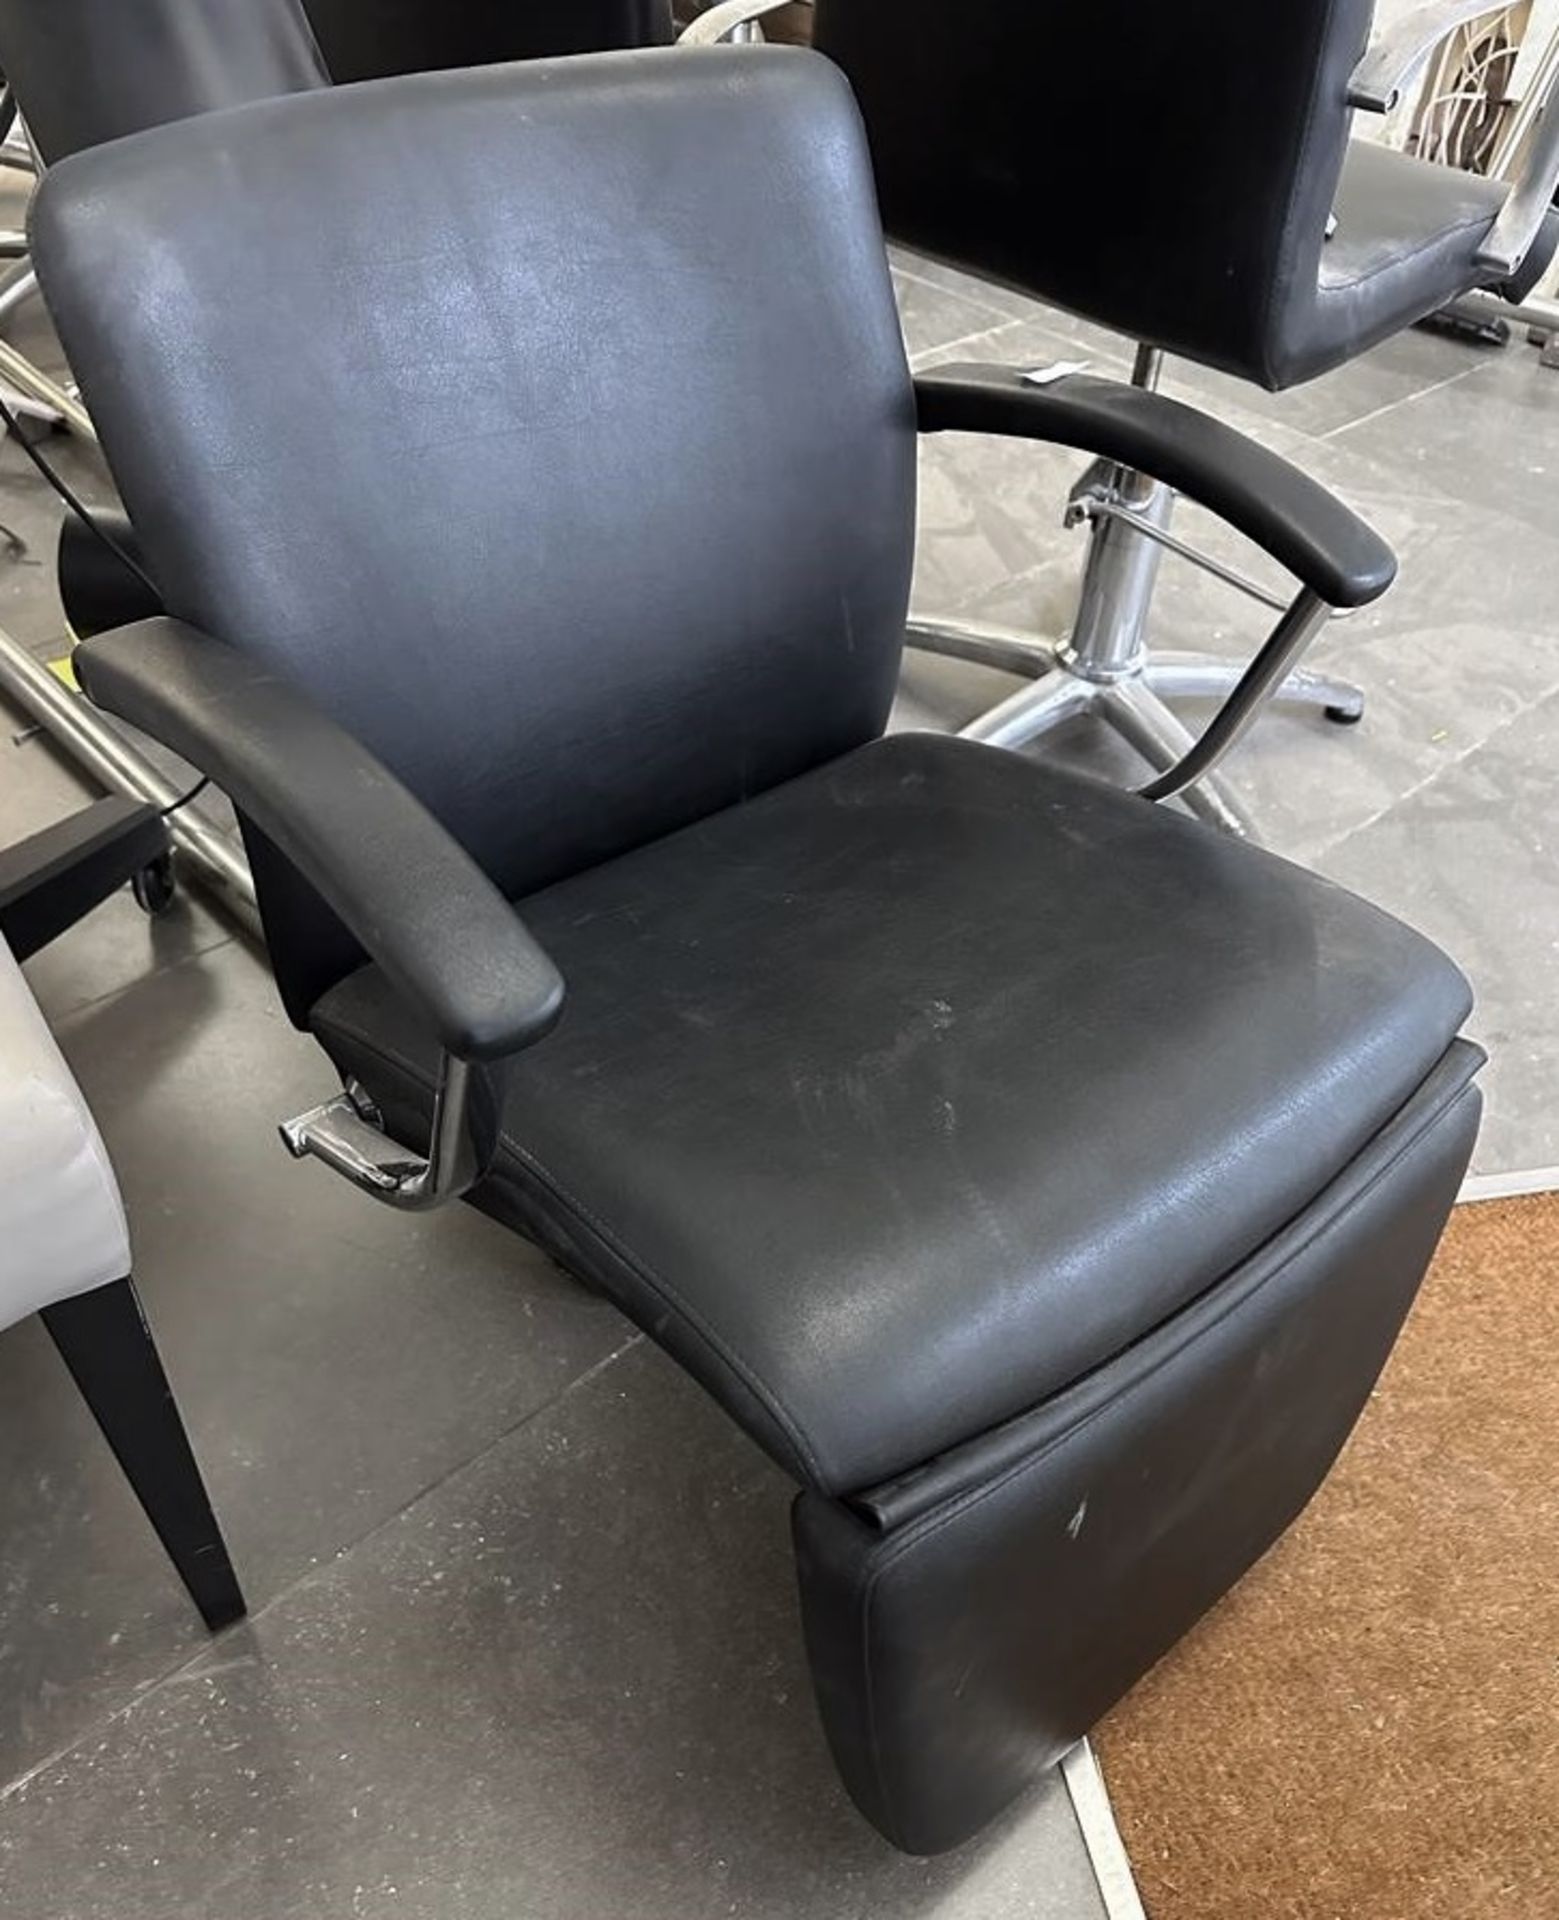 1 x Black Leather Backwash Reclining Chair And Sink - From An Award-winning Chelsea Hair Salon - - Image 2 of 5